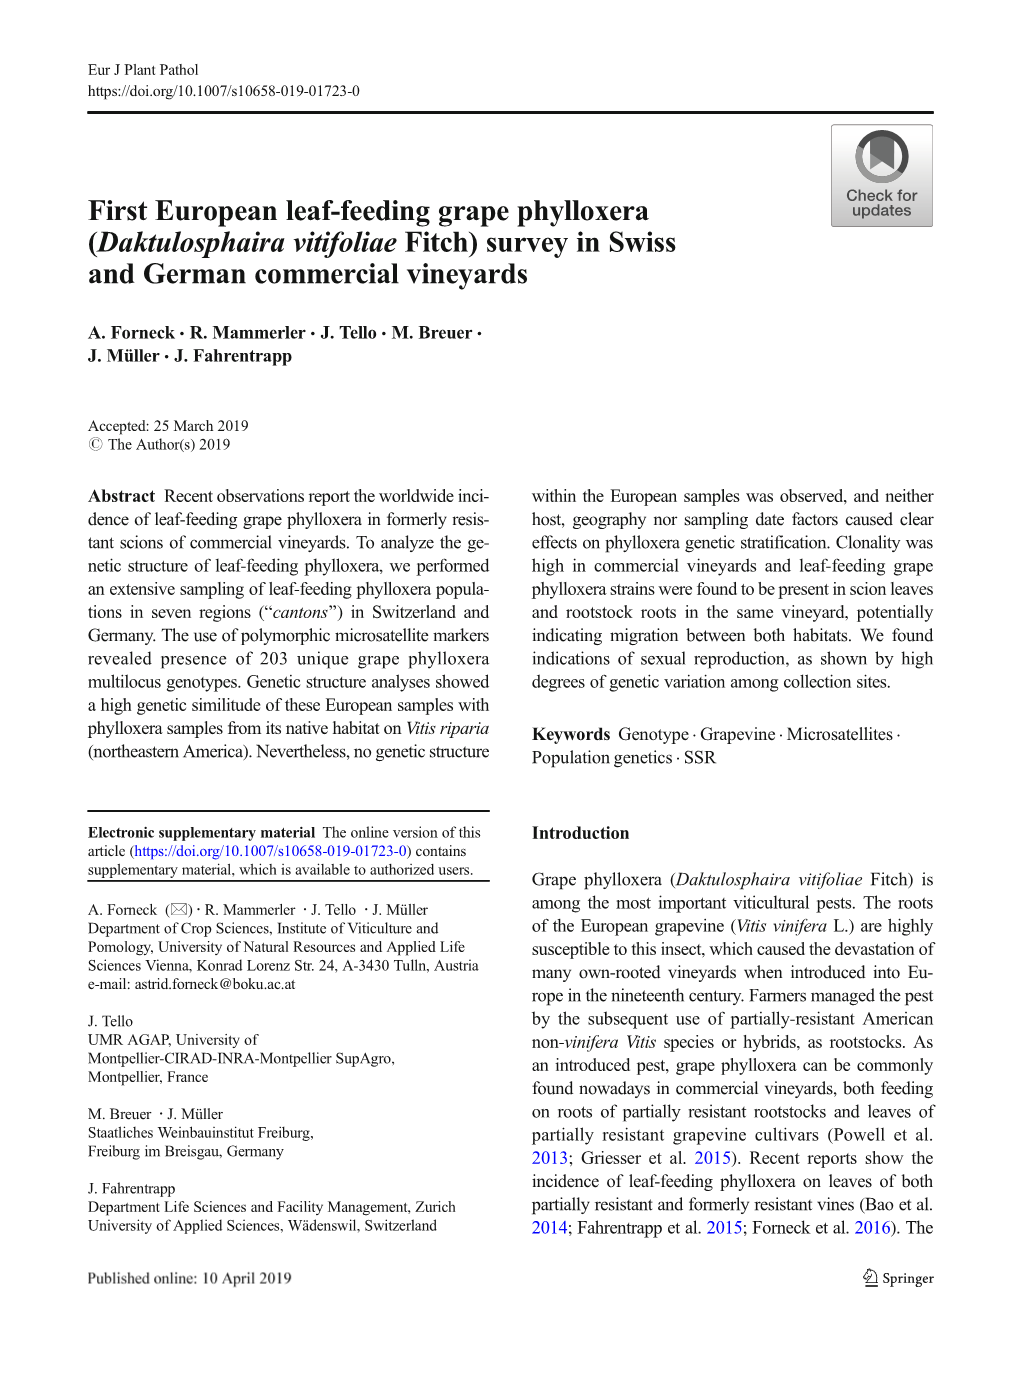 First European Leaf-Feeding Grape Phylloxera (Daktulosphaira Vitifoliae Fitch) Survey in Swiss and German Commercial Vineyards